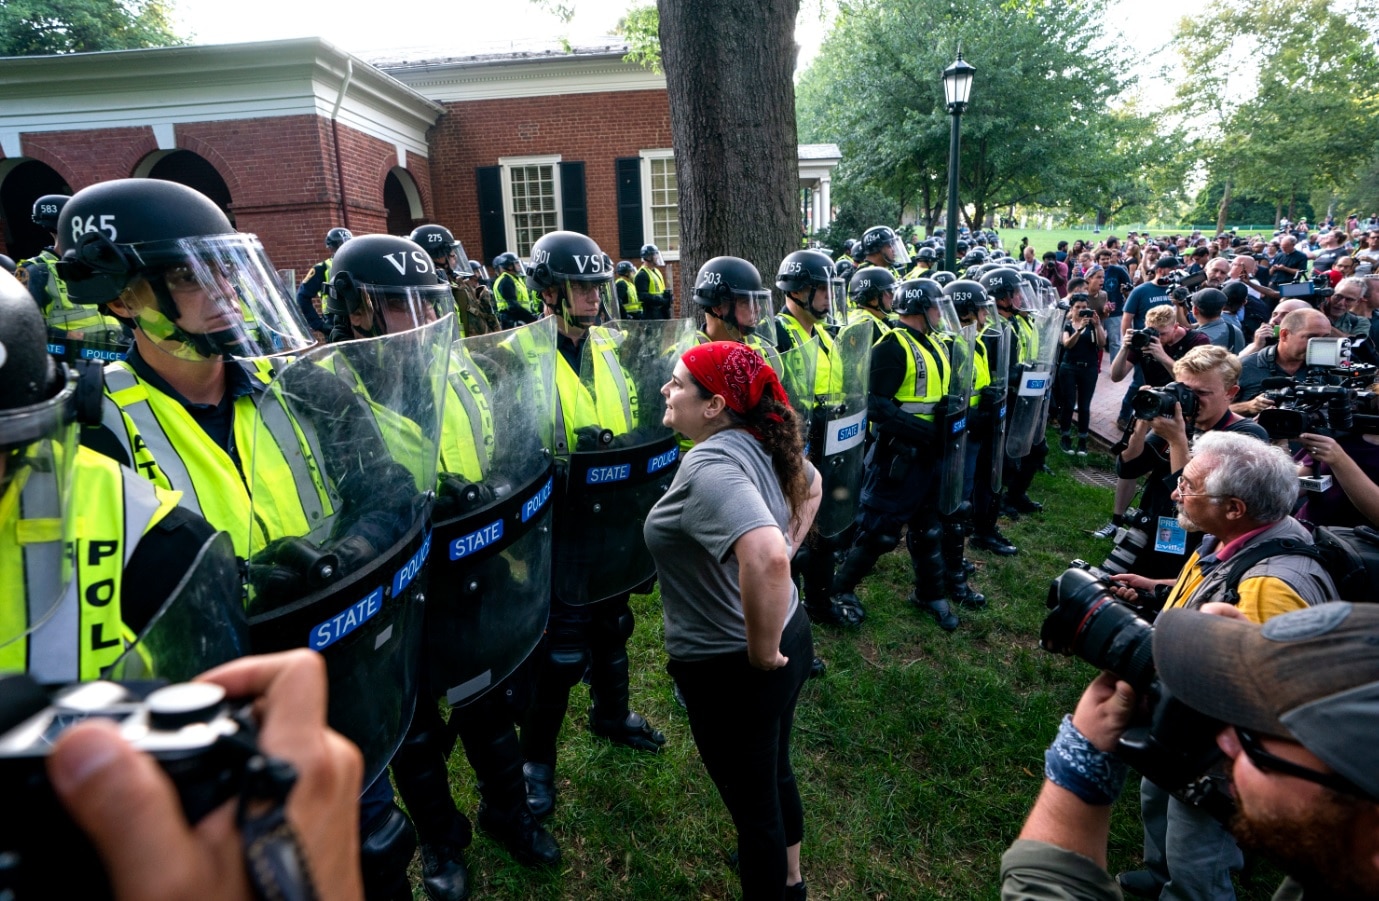 State police form a line as students from the University of Virginia (UVA), along with residents and anti-fascists, march across the UVA campus 